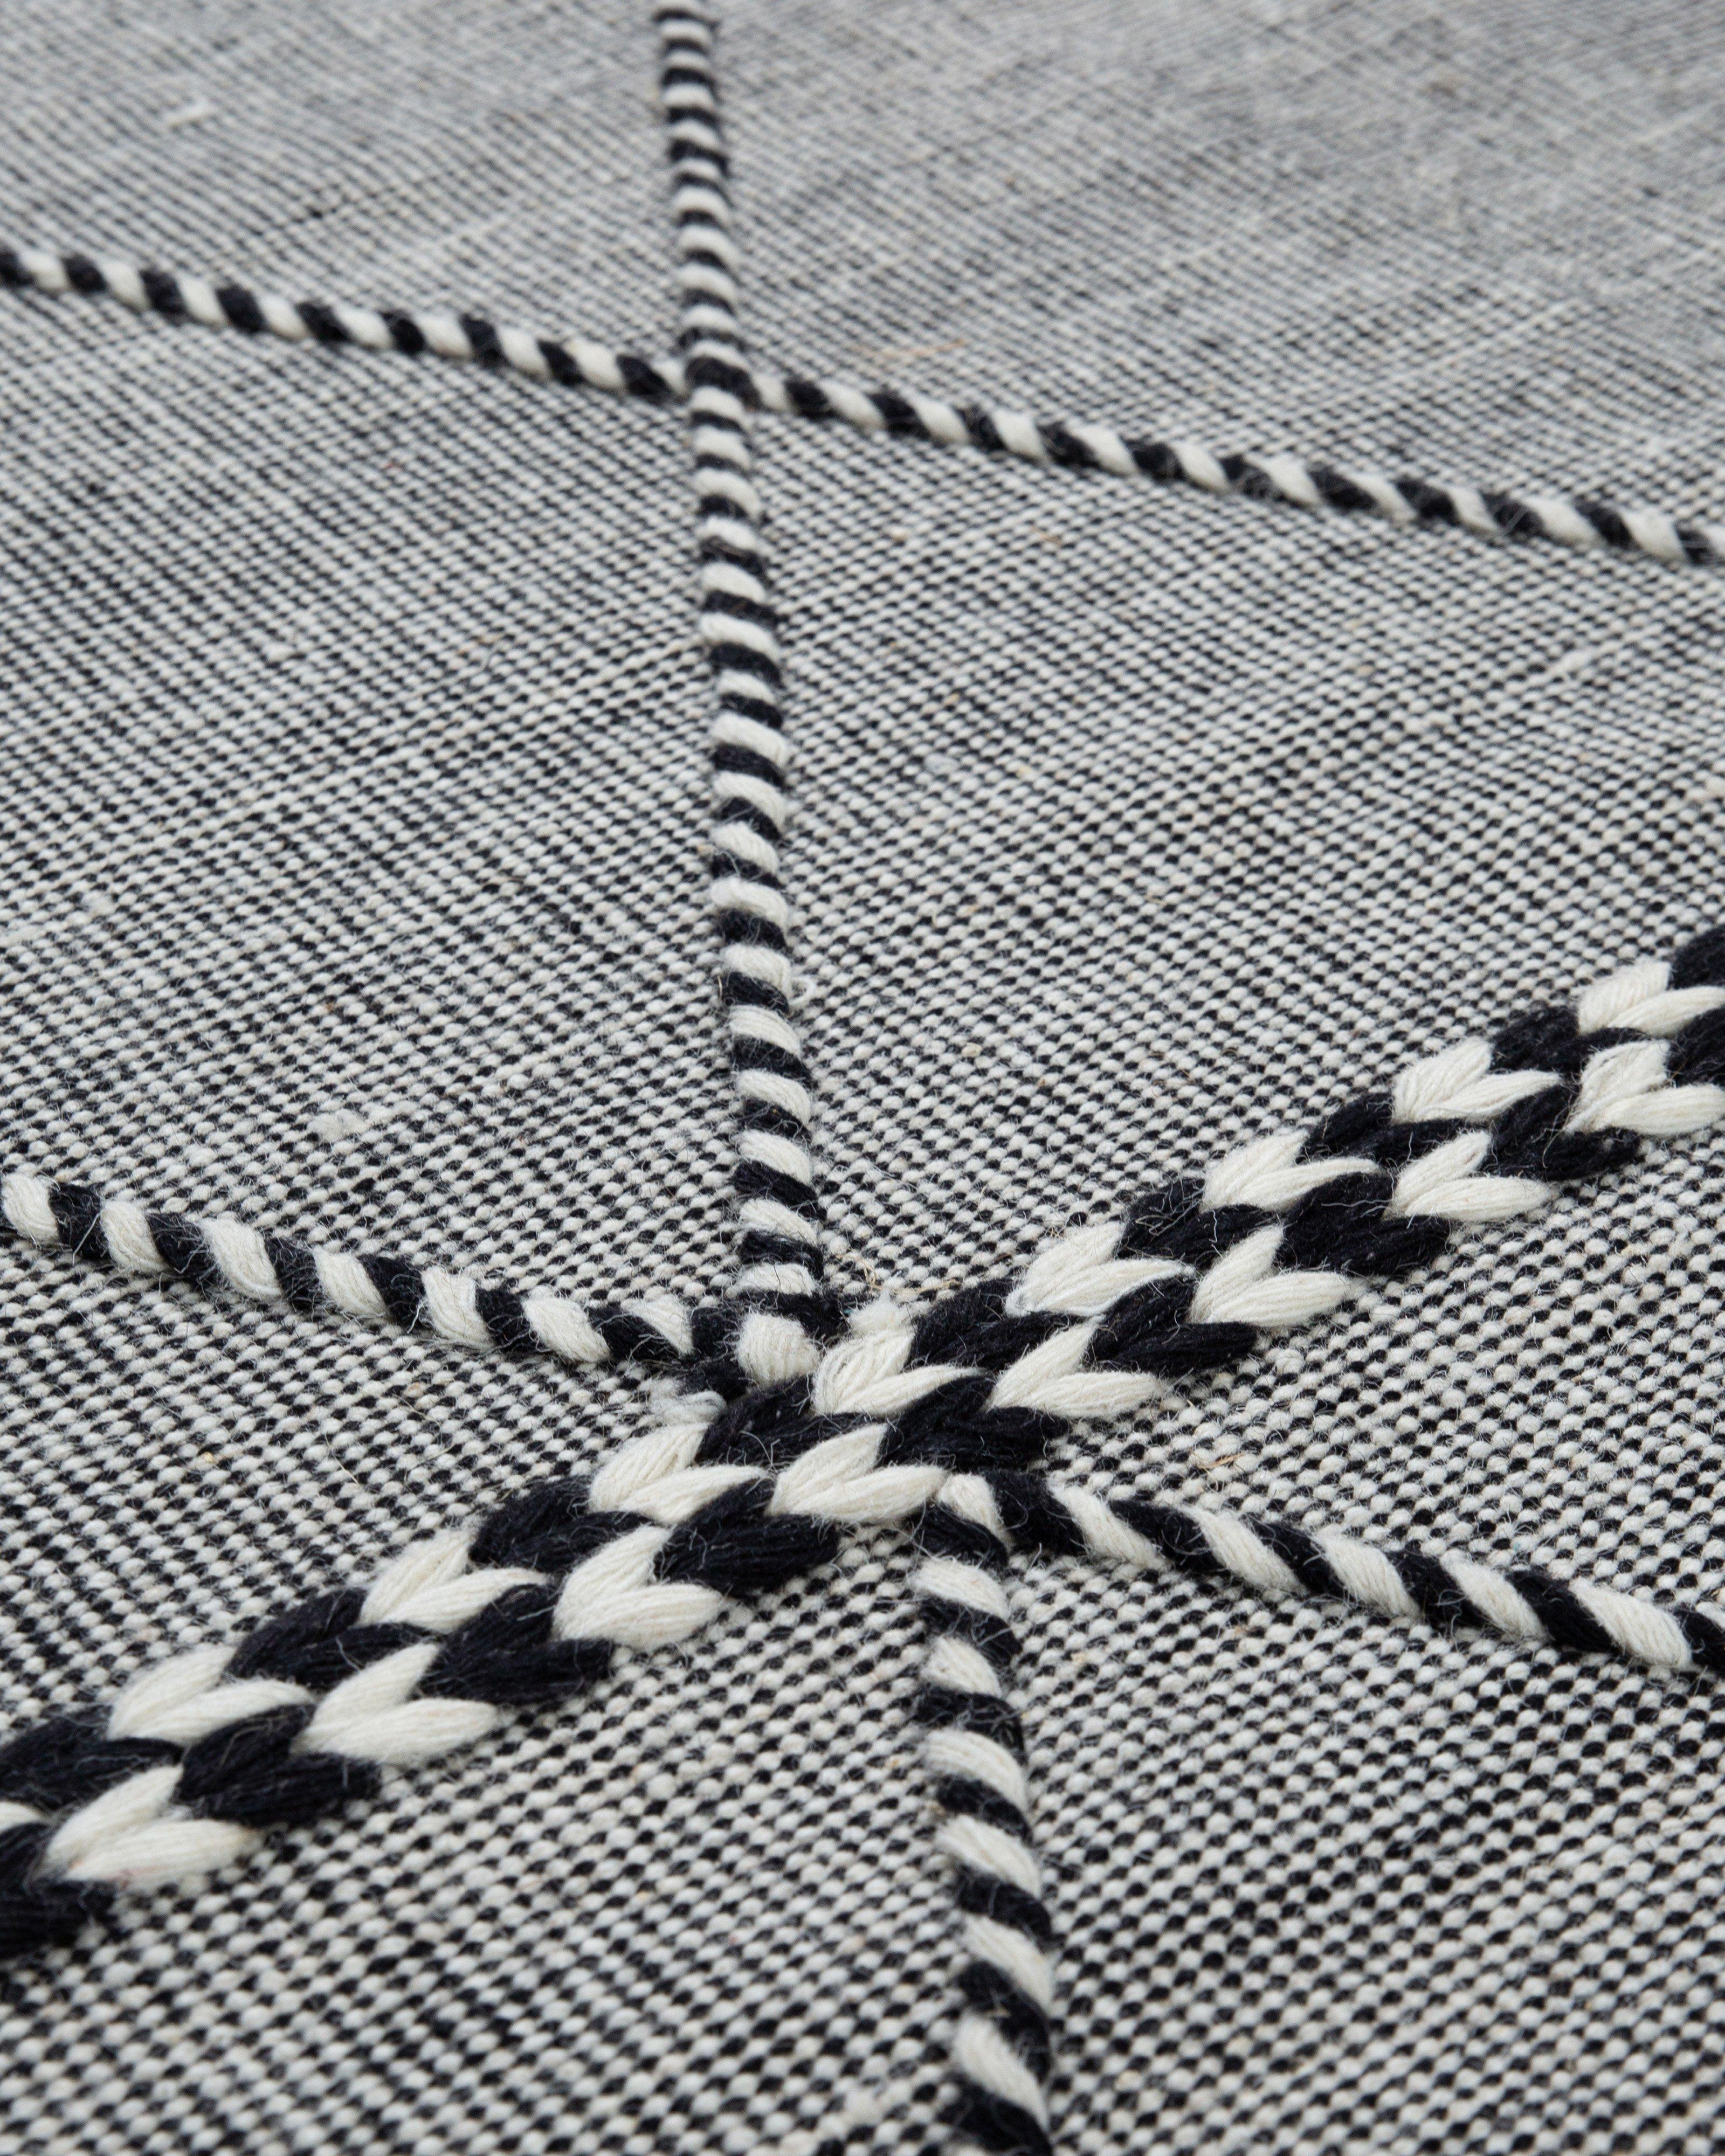 Black and White Wool Woven Rug -  Milk